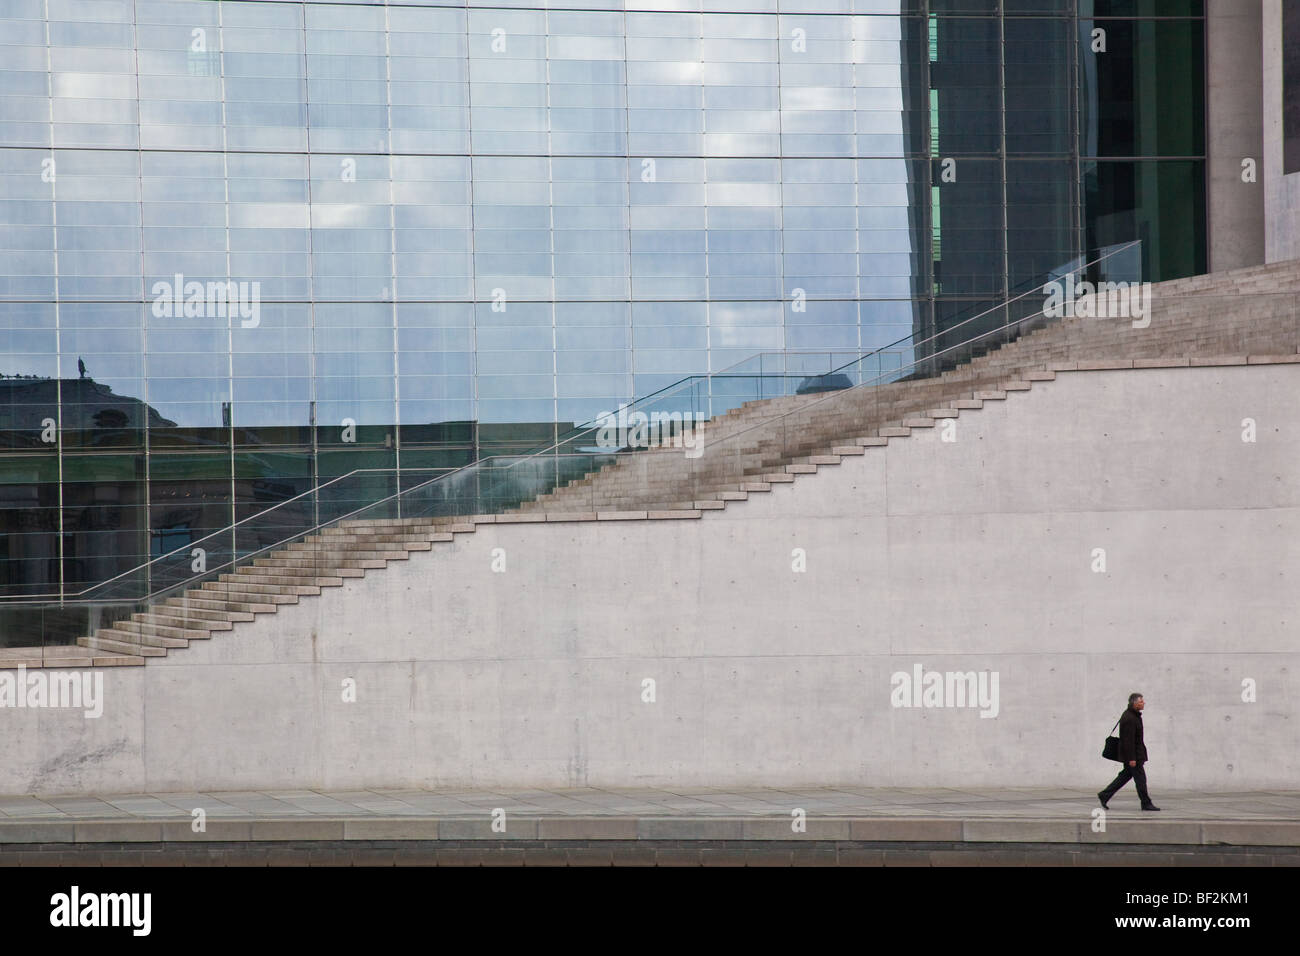 A man walking in front of the Marie-Elisabeth Luders Building by the banks of the River Spree in Berlin Stock Photo